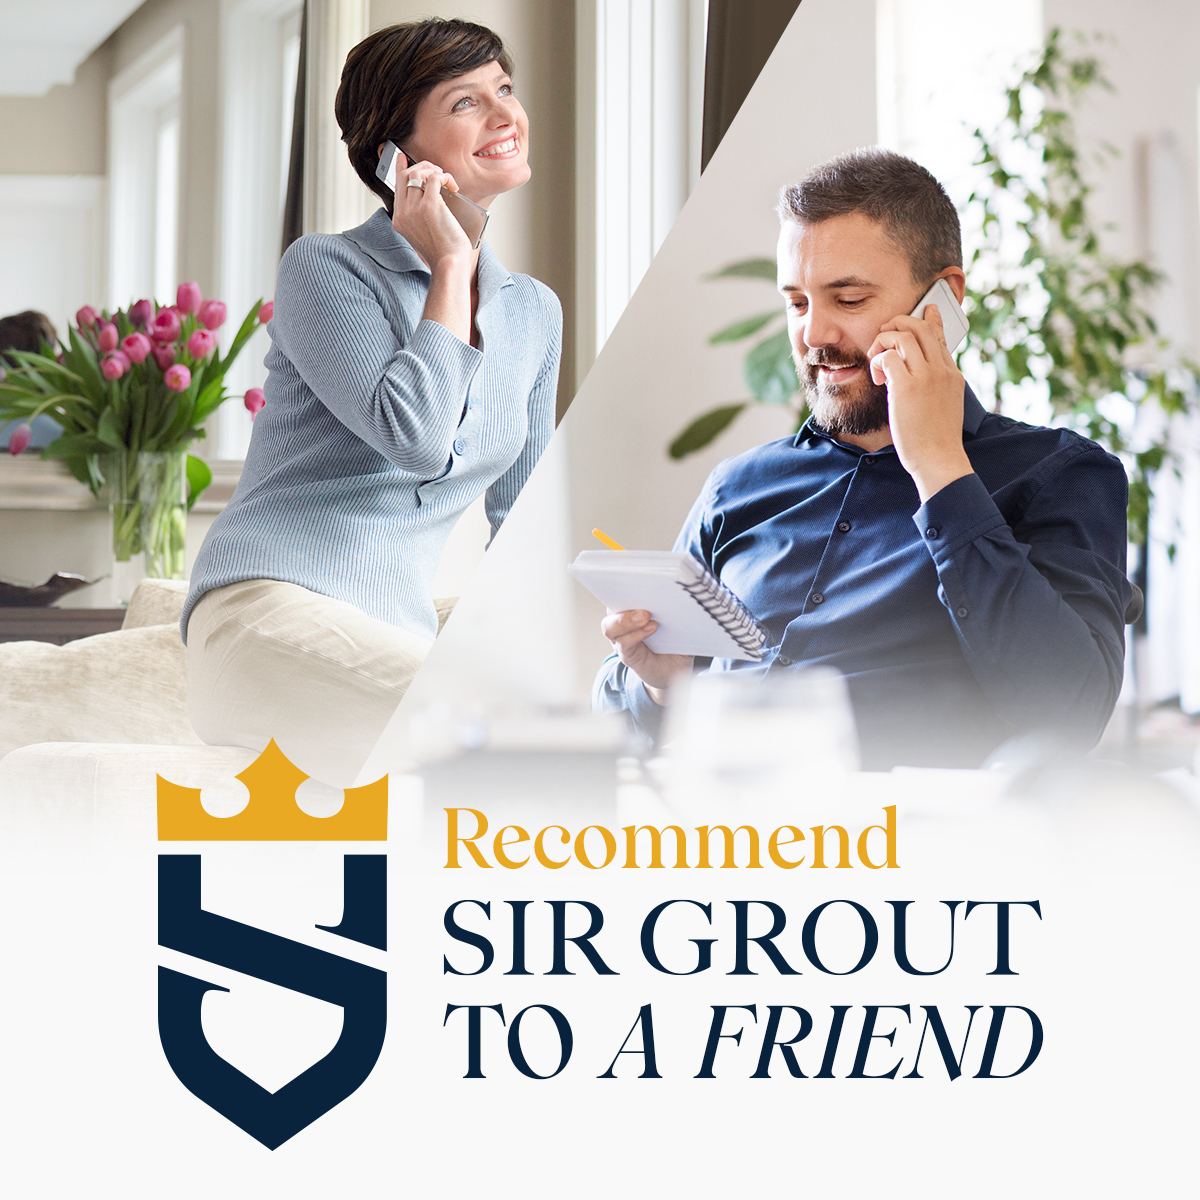 Recommend Sir Grout To a Friend